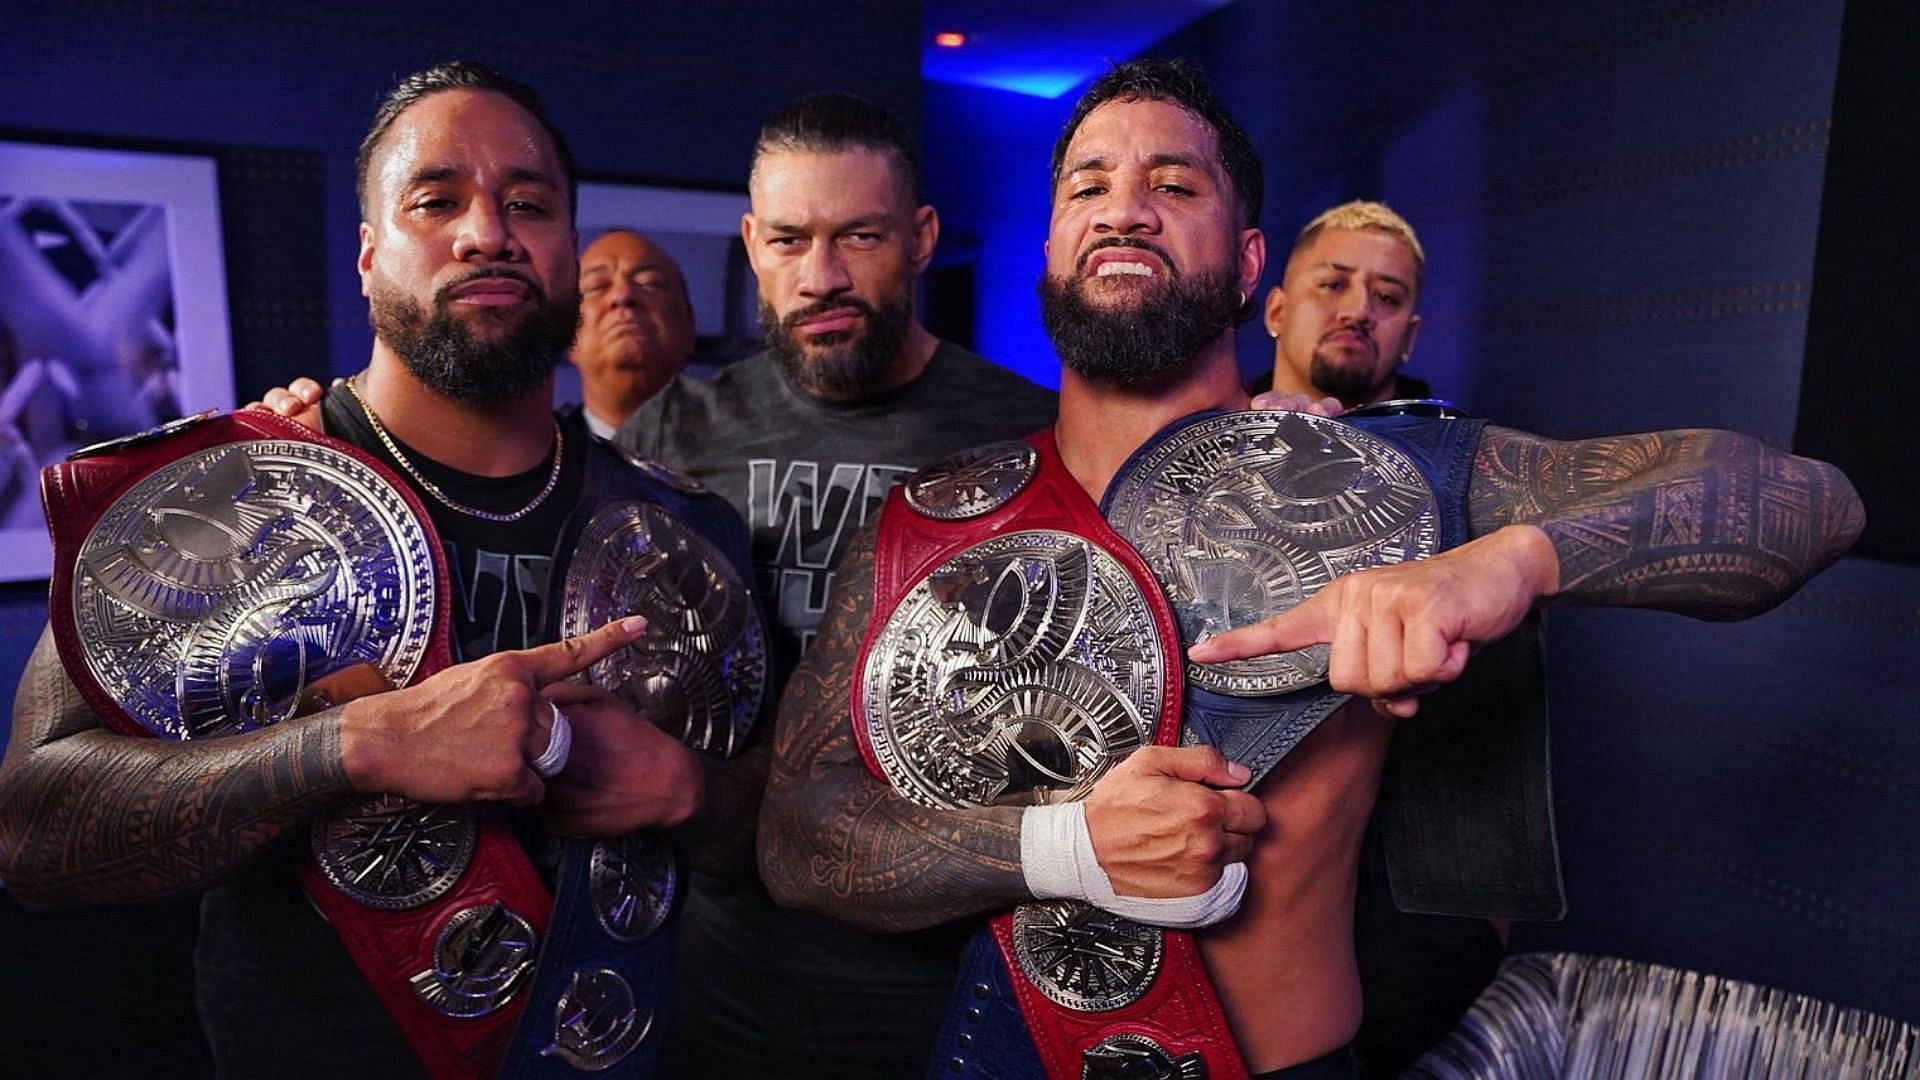 The Usos are the longest reigning WWE tag team champions in history